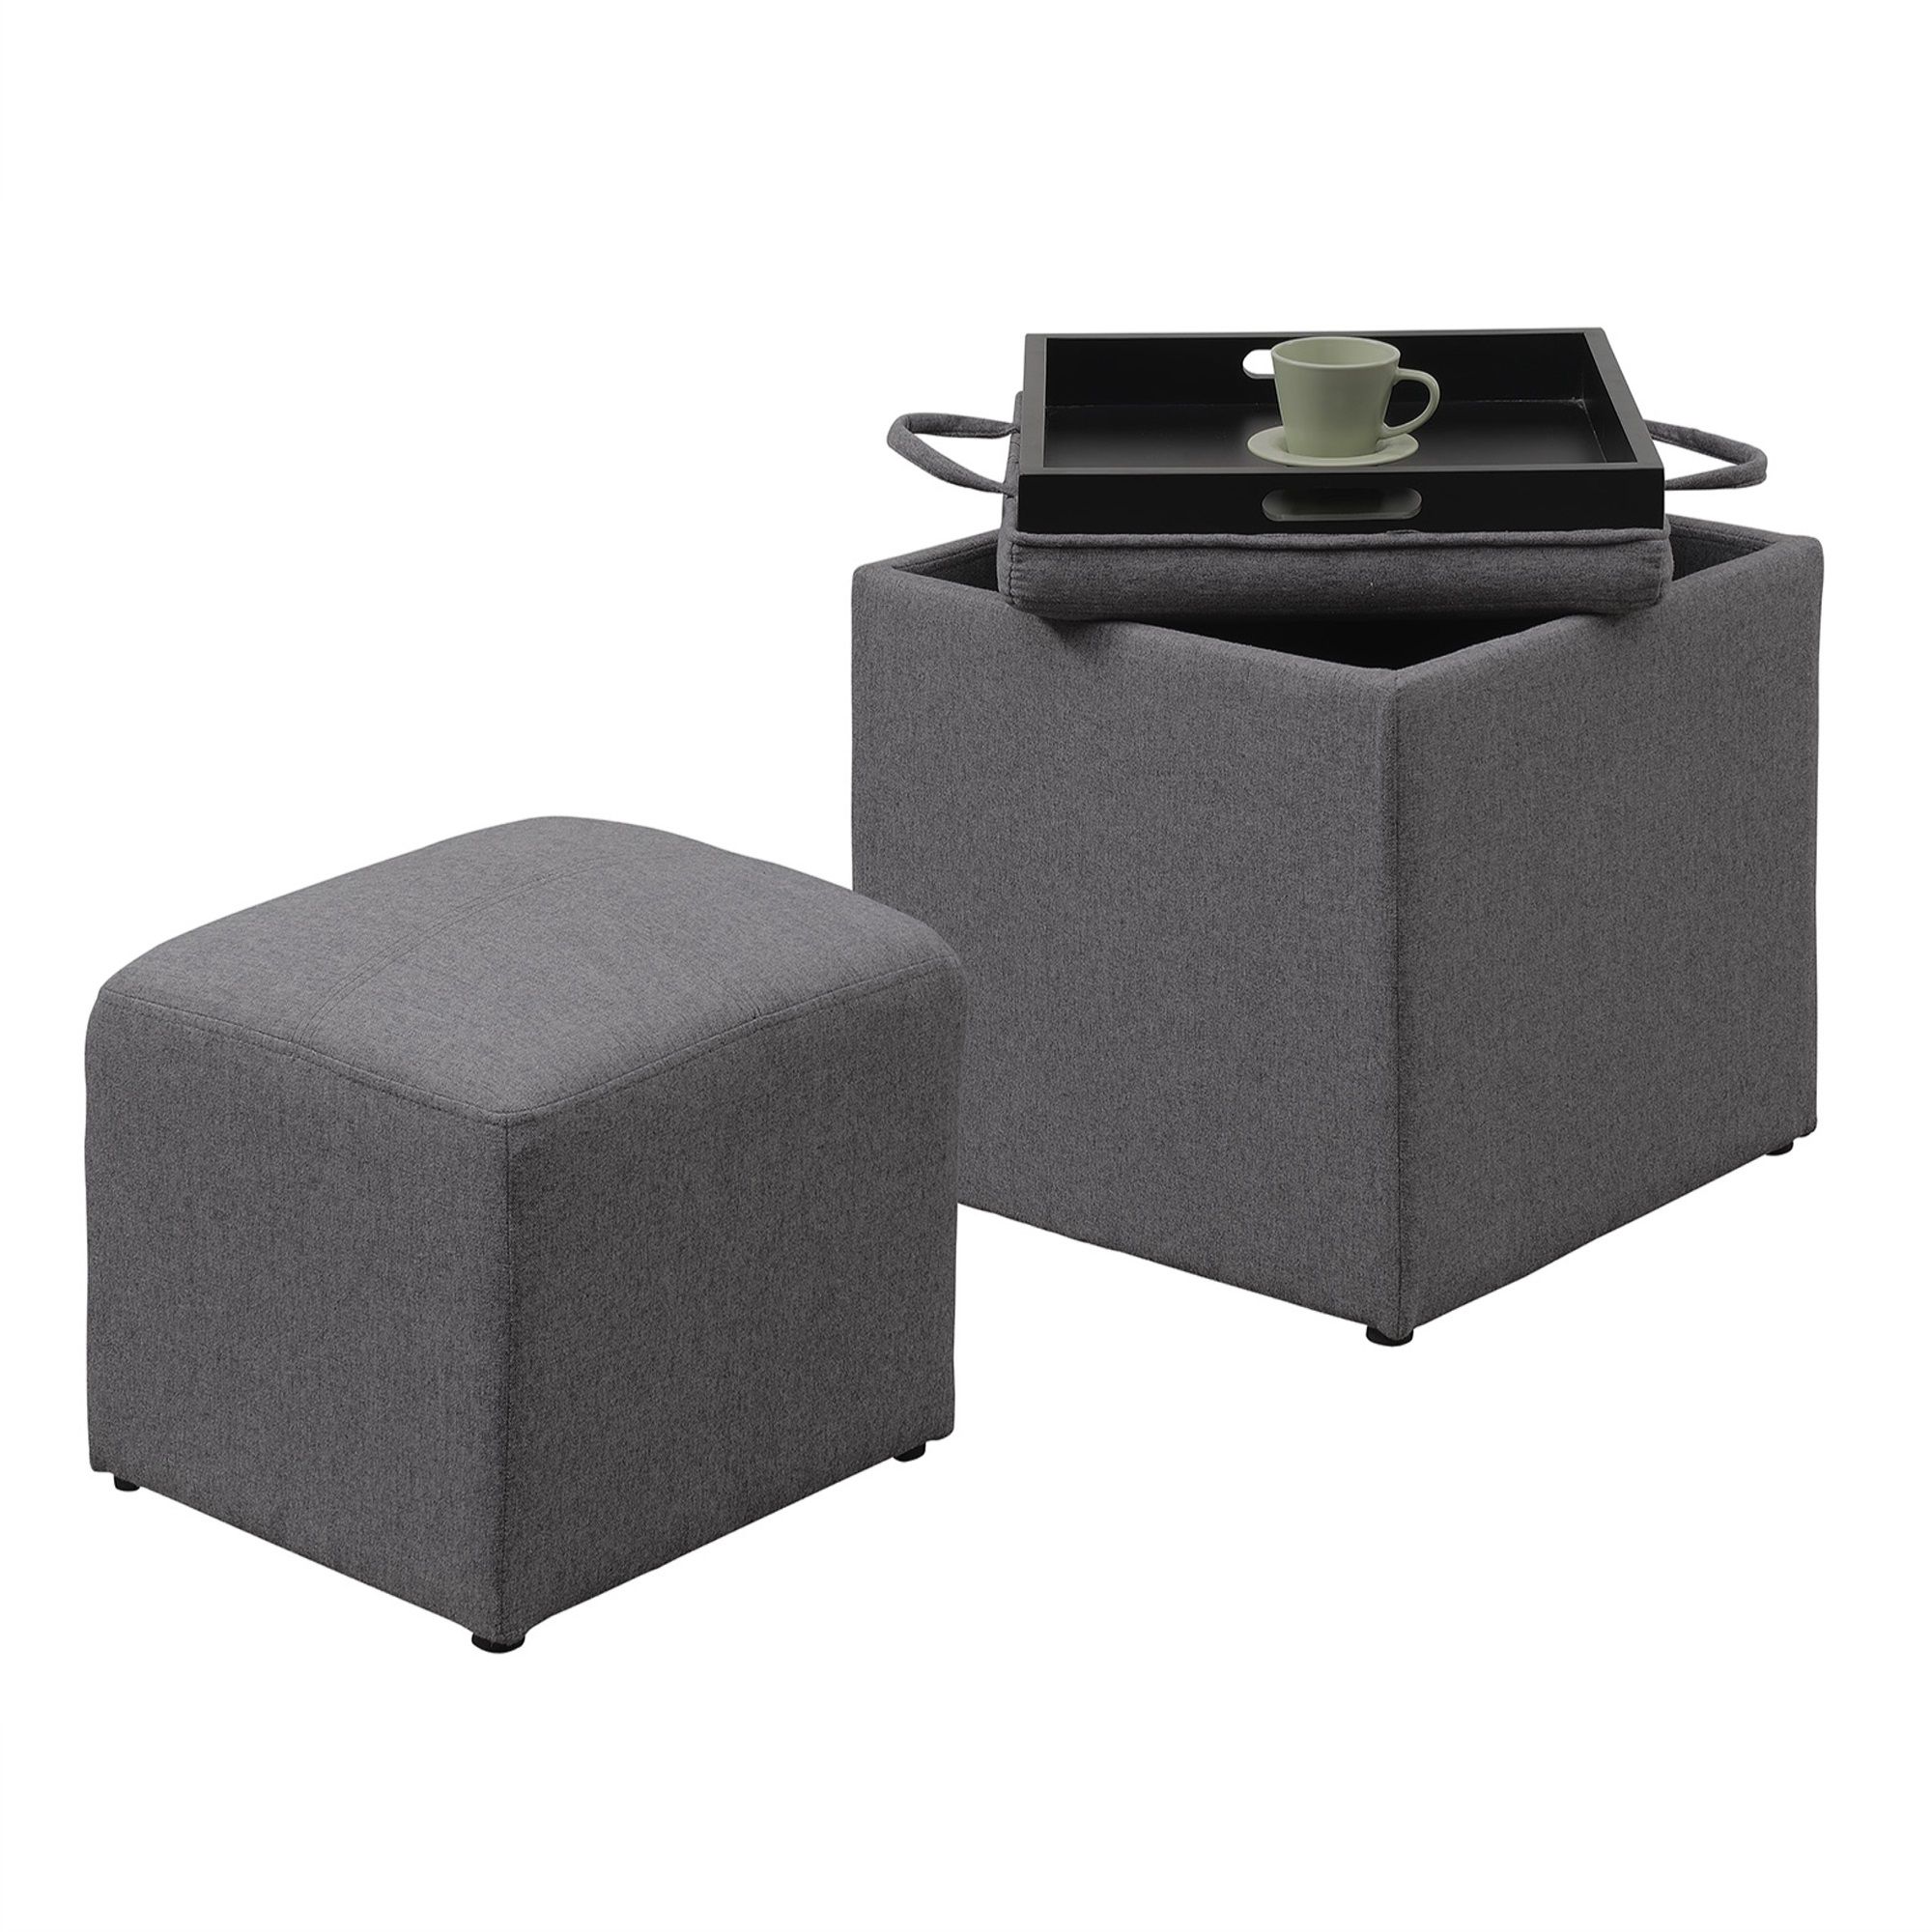 Most Recently Released Ottomans With Stool And Reversible Tray Regarding Ergode Designs4comfort Park Avenue Single Ottoman With Stool And Reversible  Tray – Walmart (View 9 of 10)